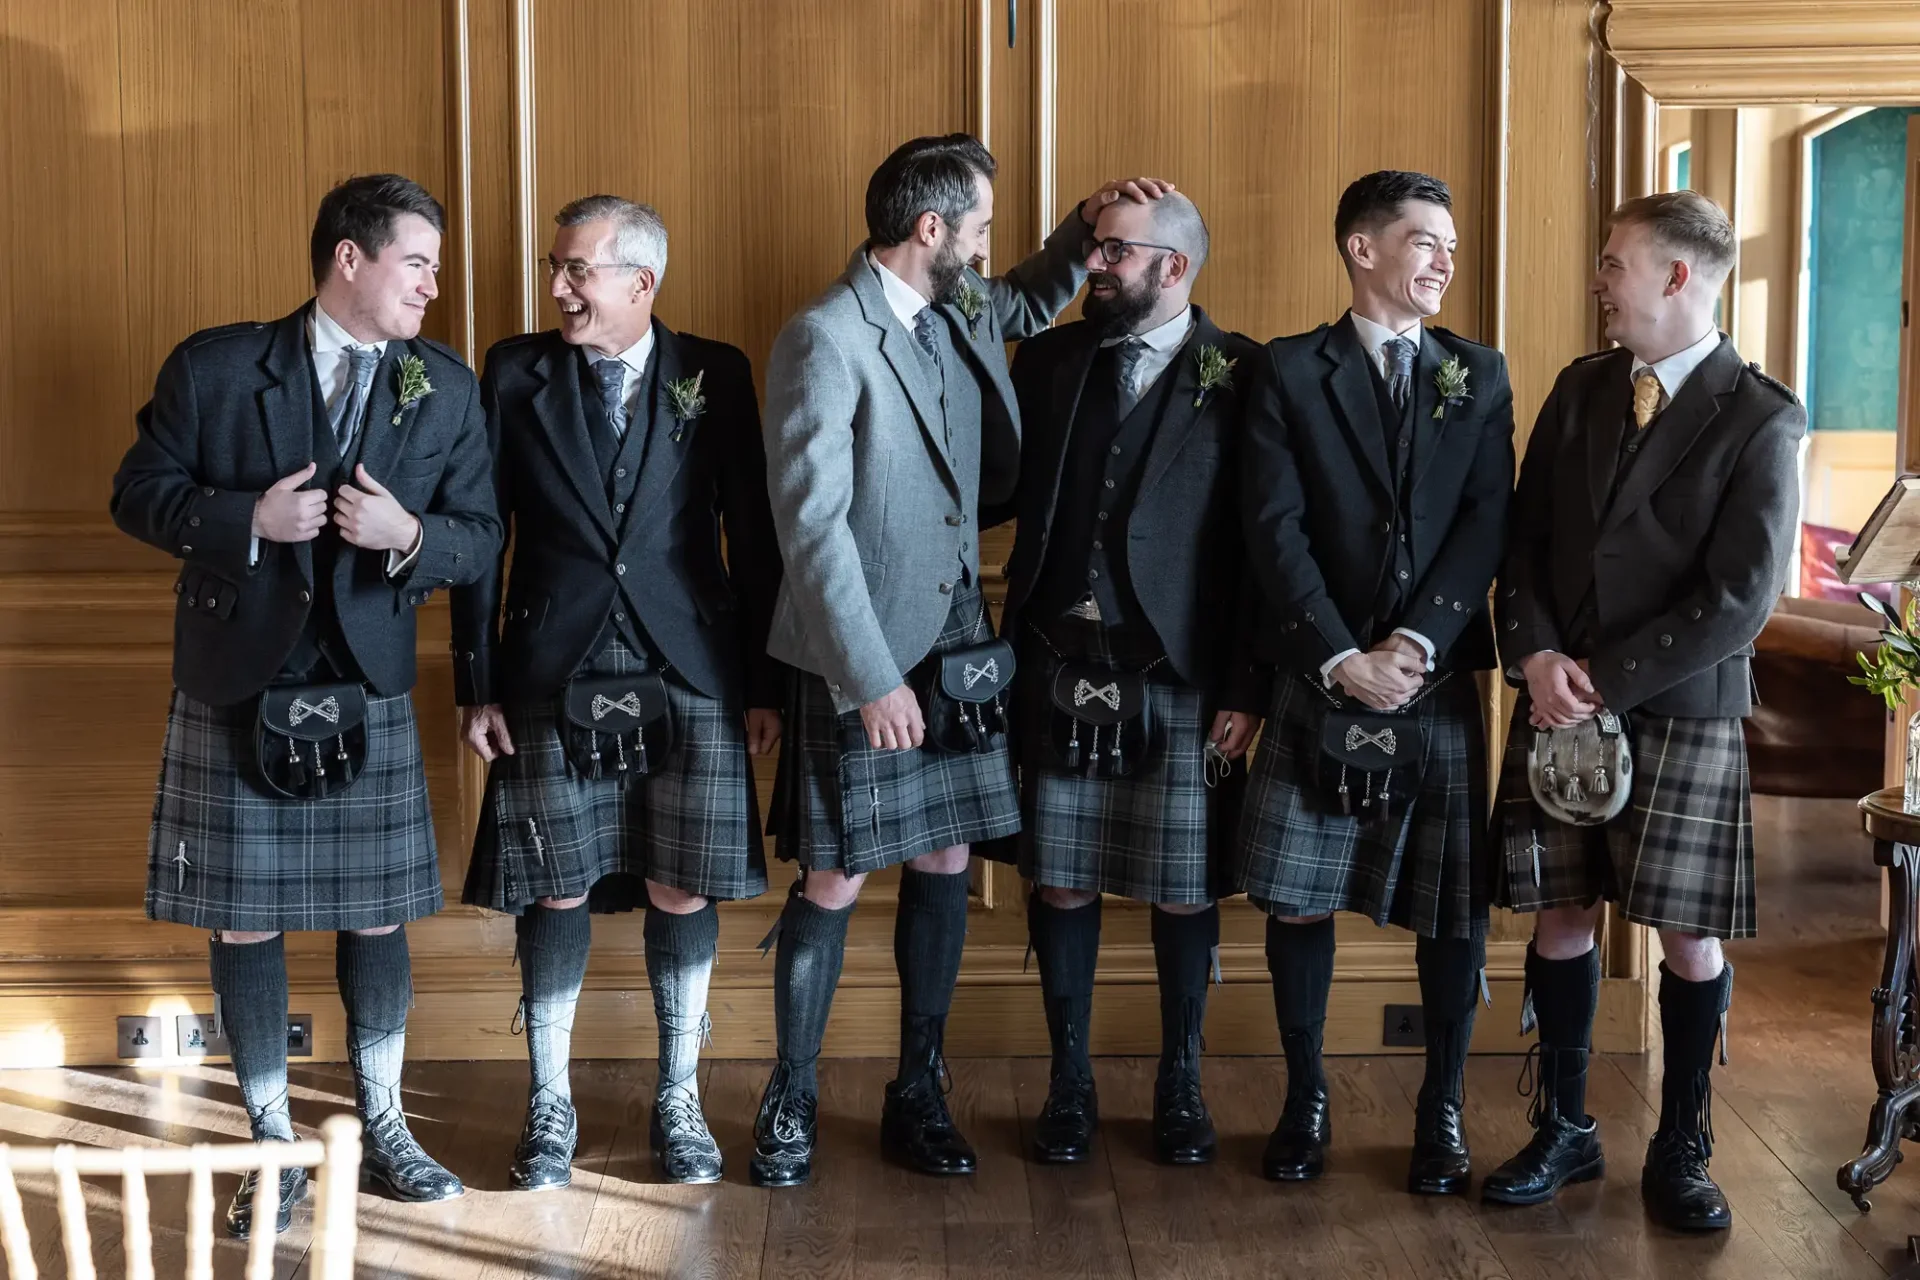 Six men in traditional scottish kilts and jackets, smiling and interacting jovially in a well-lit wooden interior.